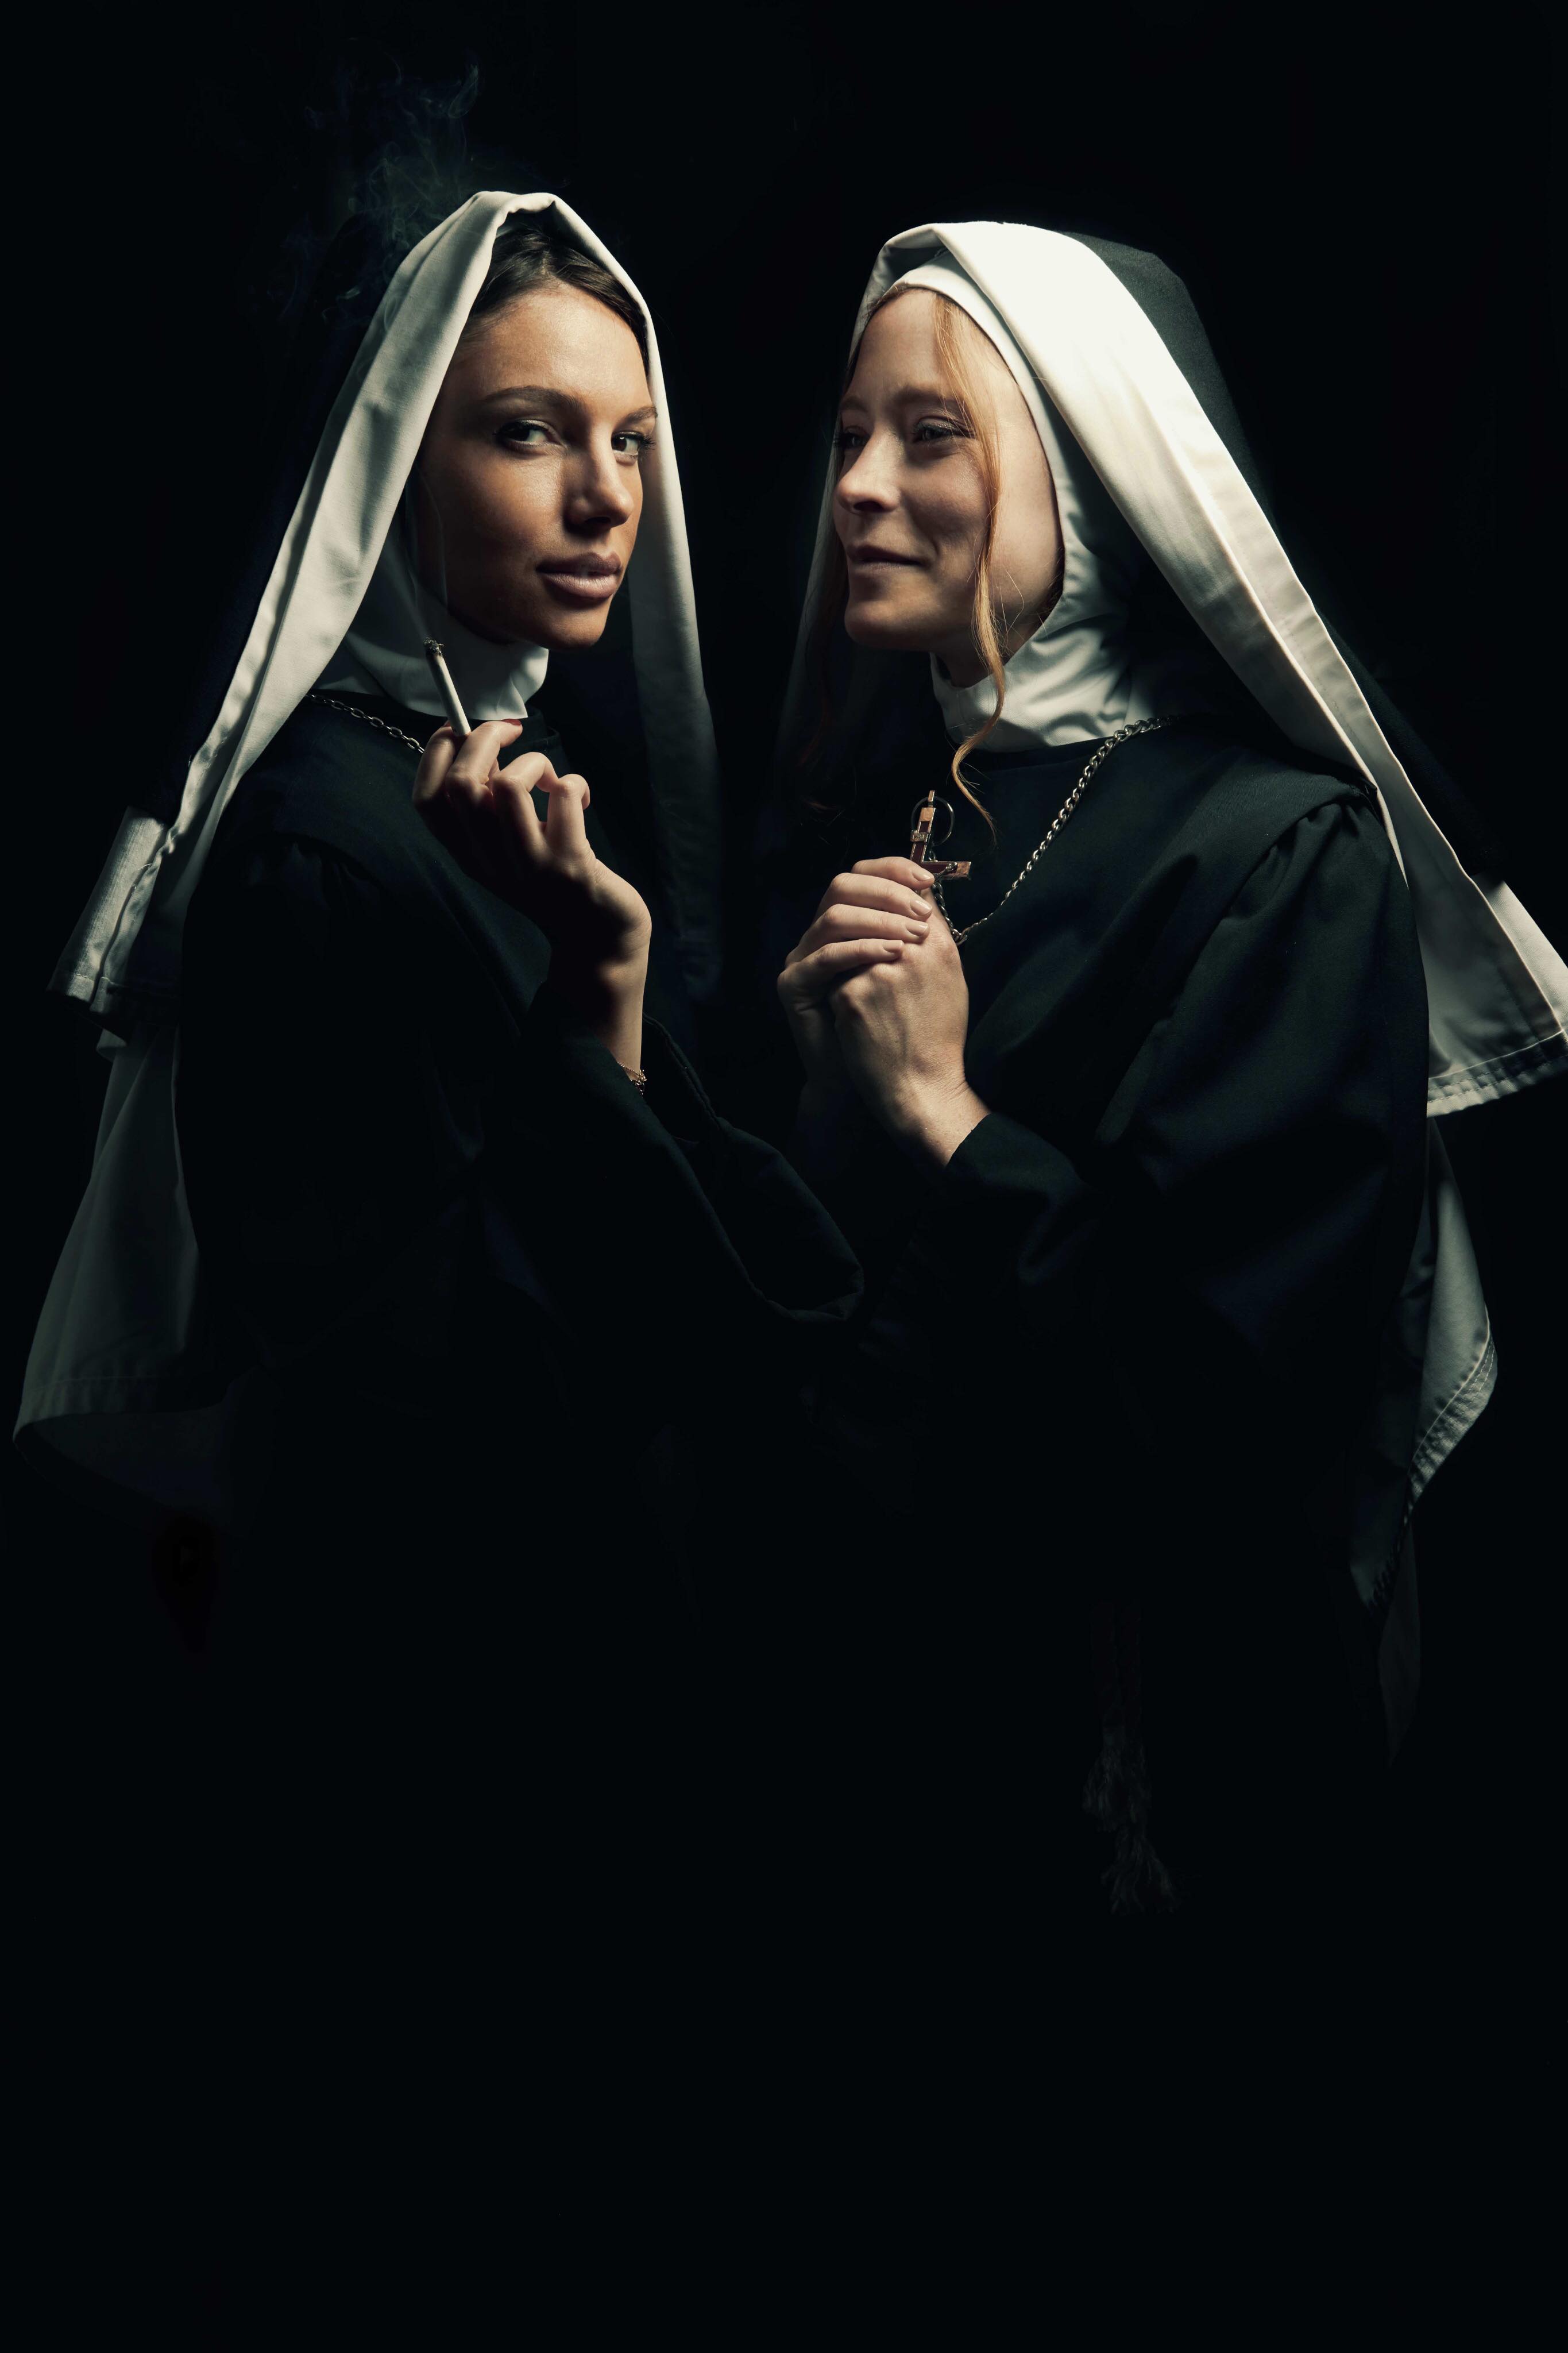 the unedited photo of the nuns in neutral colours